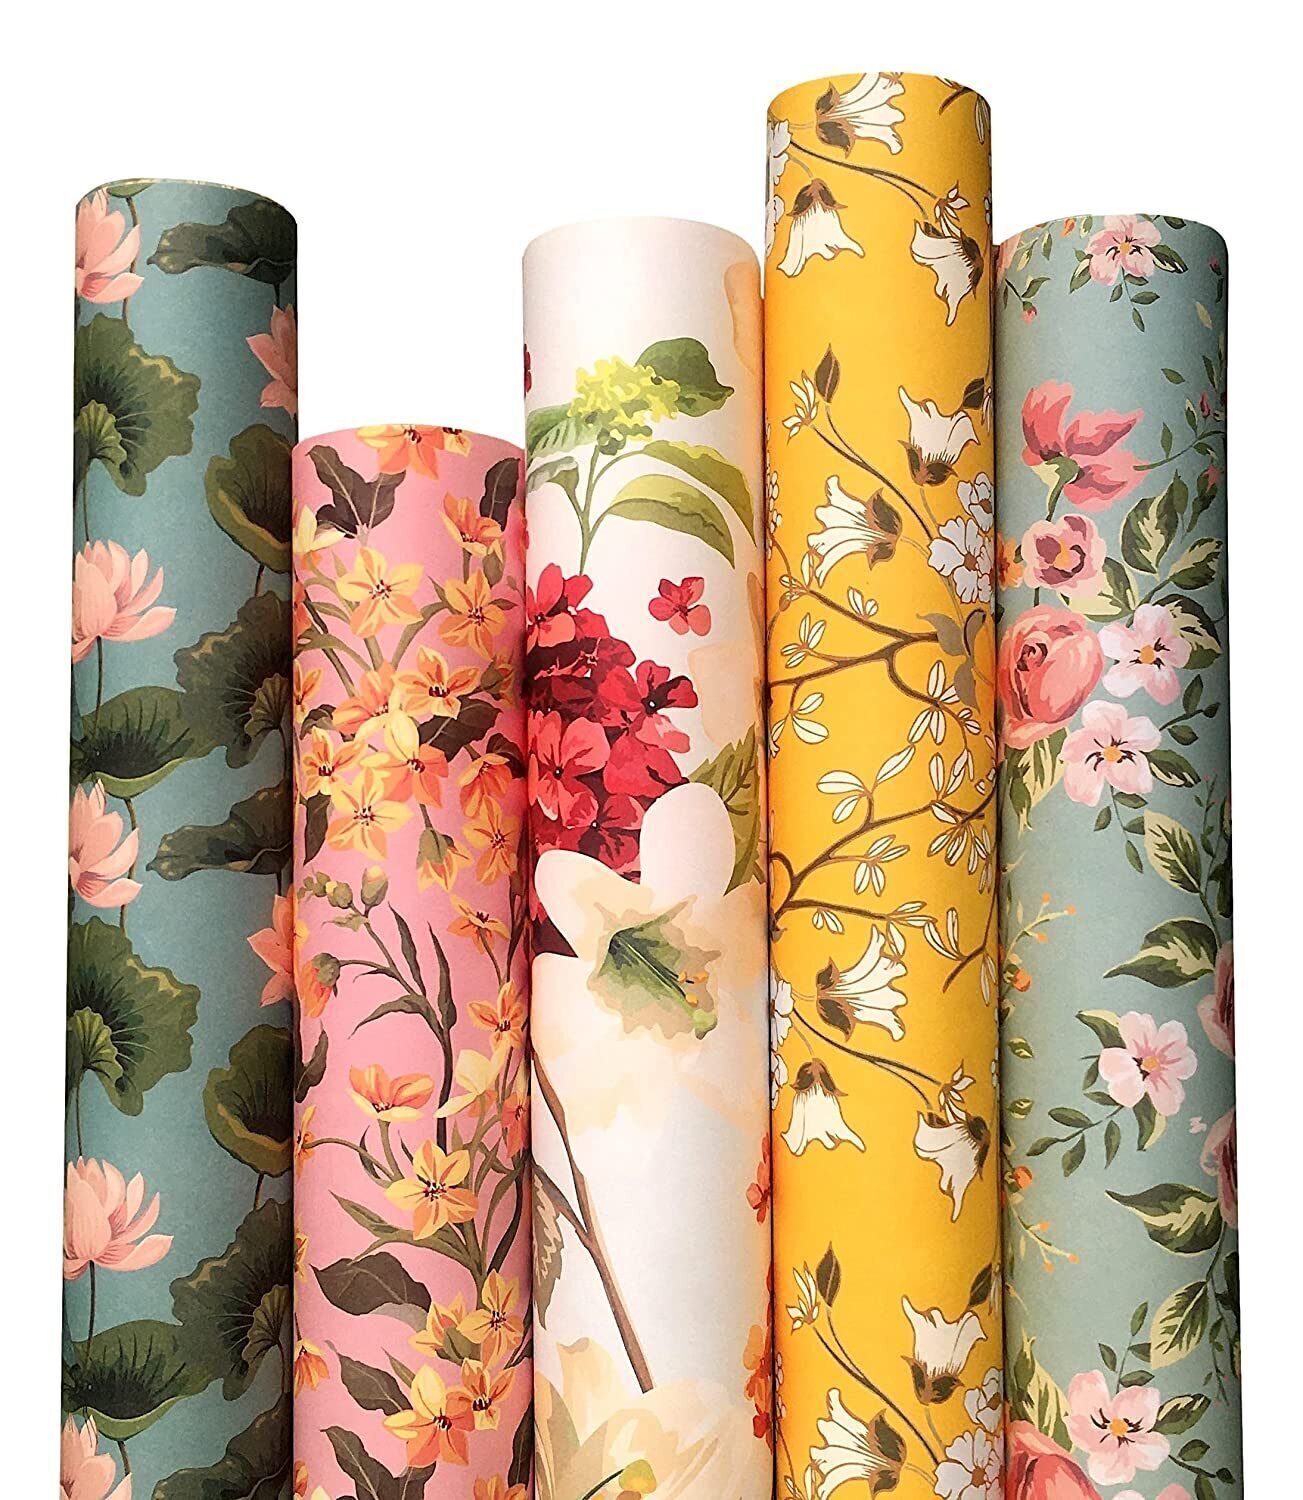 VRB Dec Wrapping Paper Sheets (Floral Print) - 5 sheets Pack (Each design 1  Pcs) Birthday Wrapping Paper With 5 Pieces of Happy Wishes,Colorful Gift